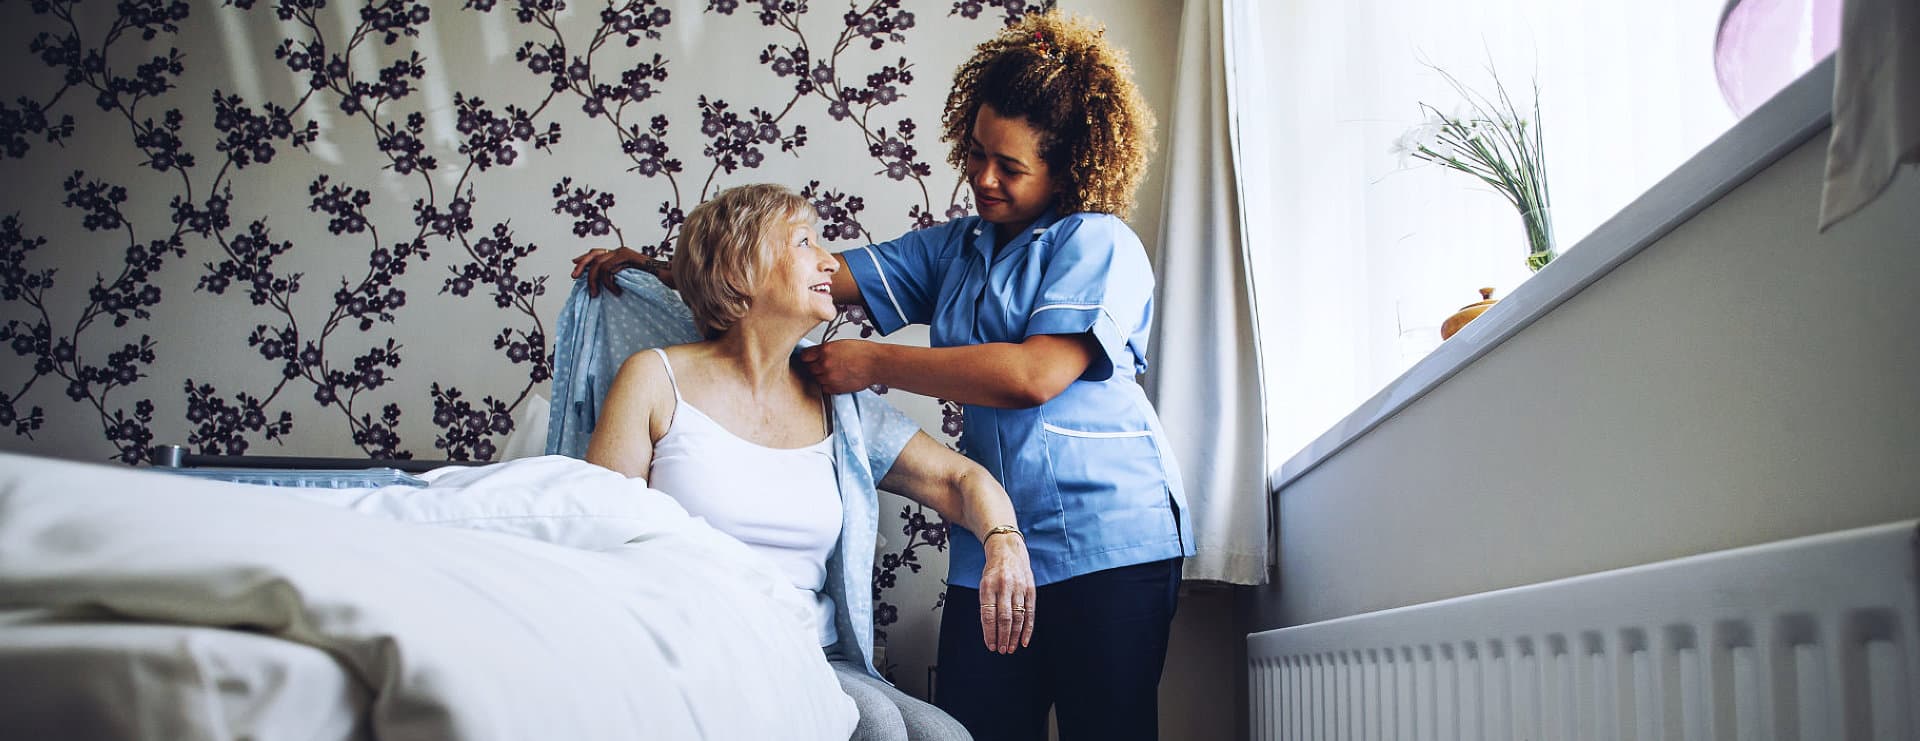 a caregiver assisting senior woman dressing in her bed